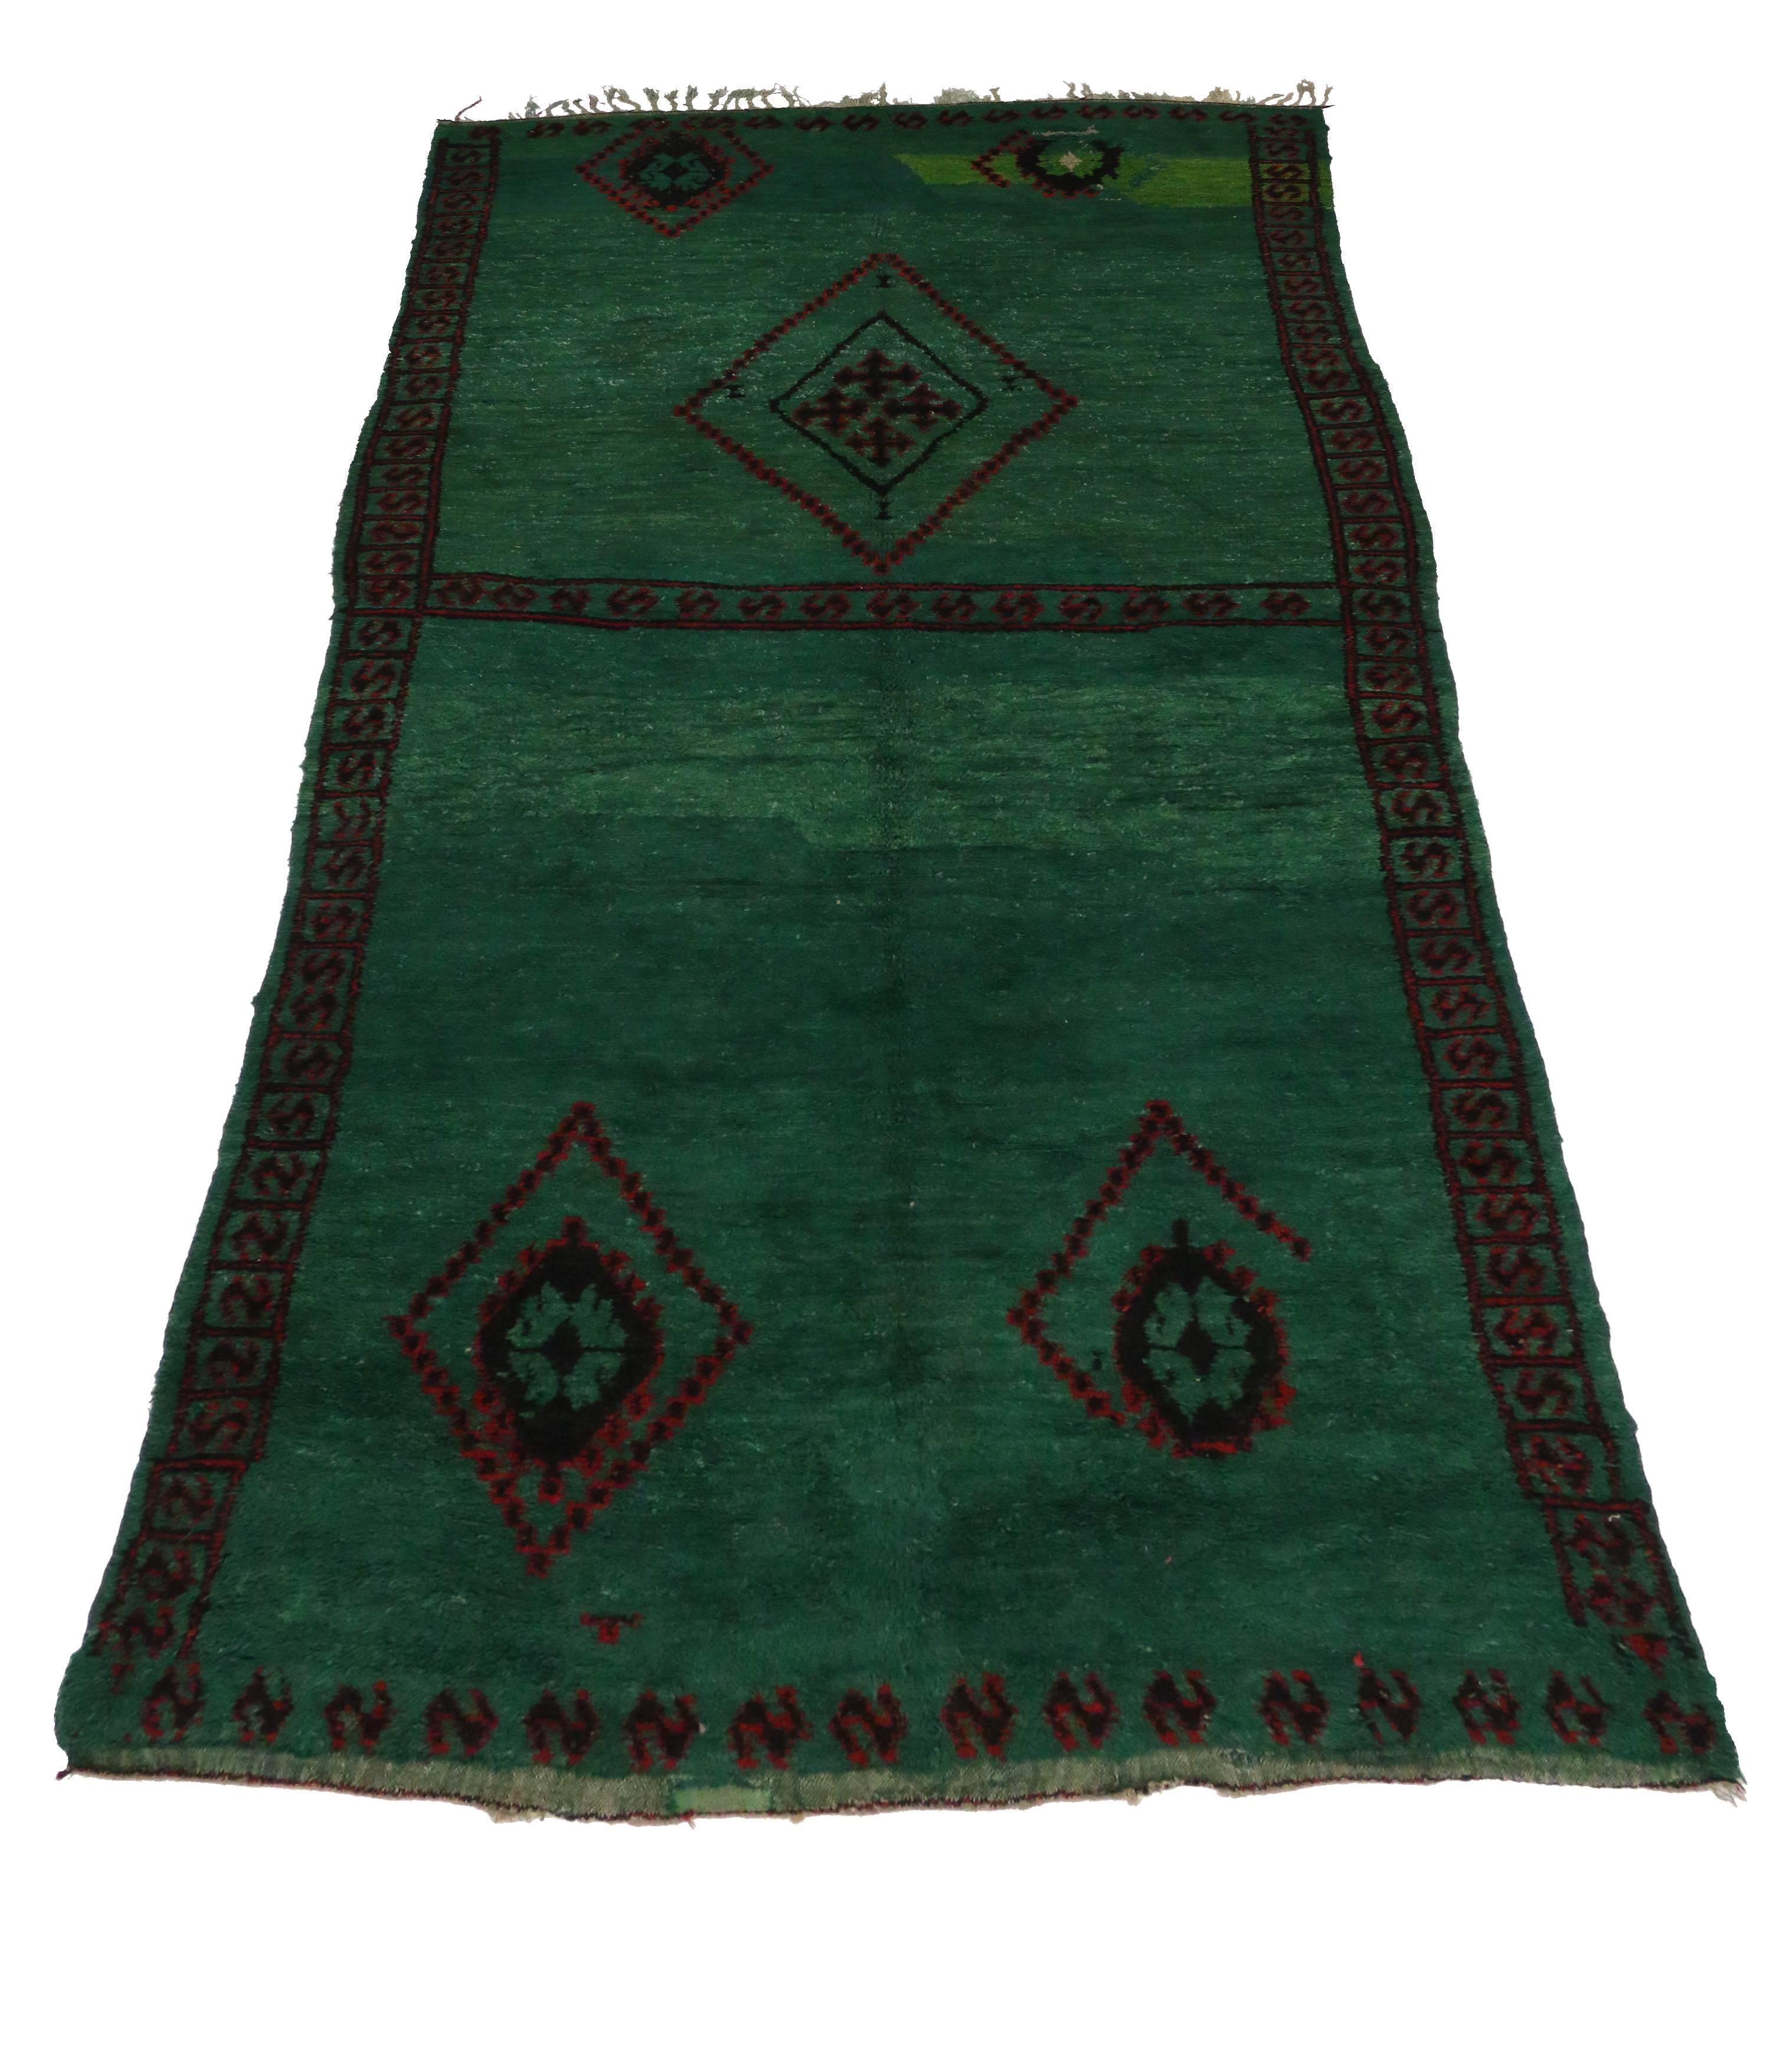 Wool Green Beni M'guild Moroccan Rug in Malachite Color with Tribal Style